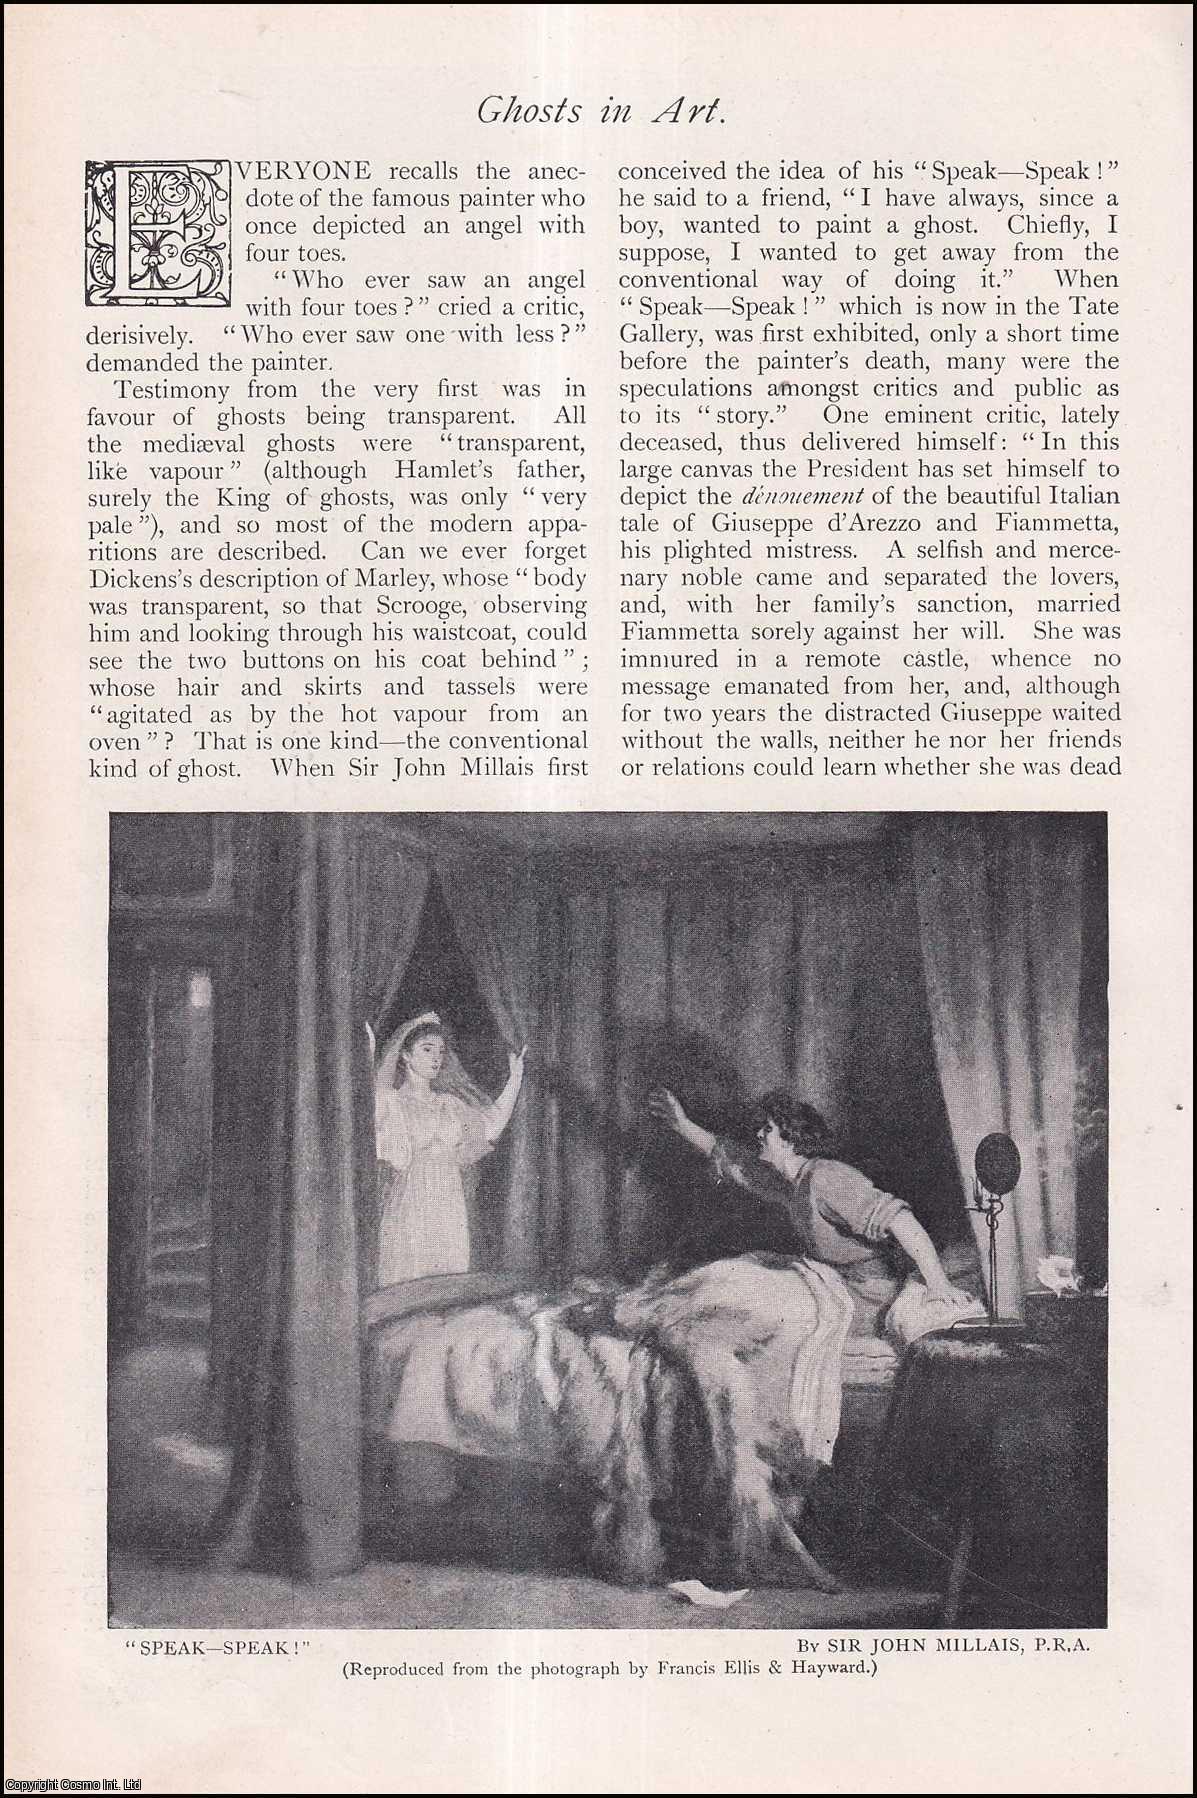 --- - Ghosts in Art. A rare original article from The Strand Magazine, 1904.